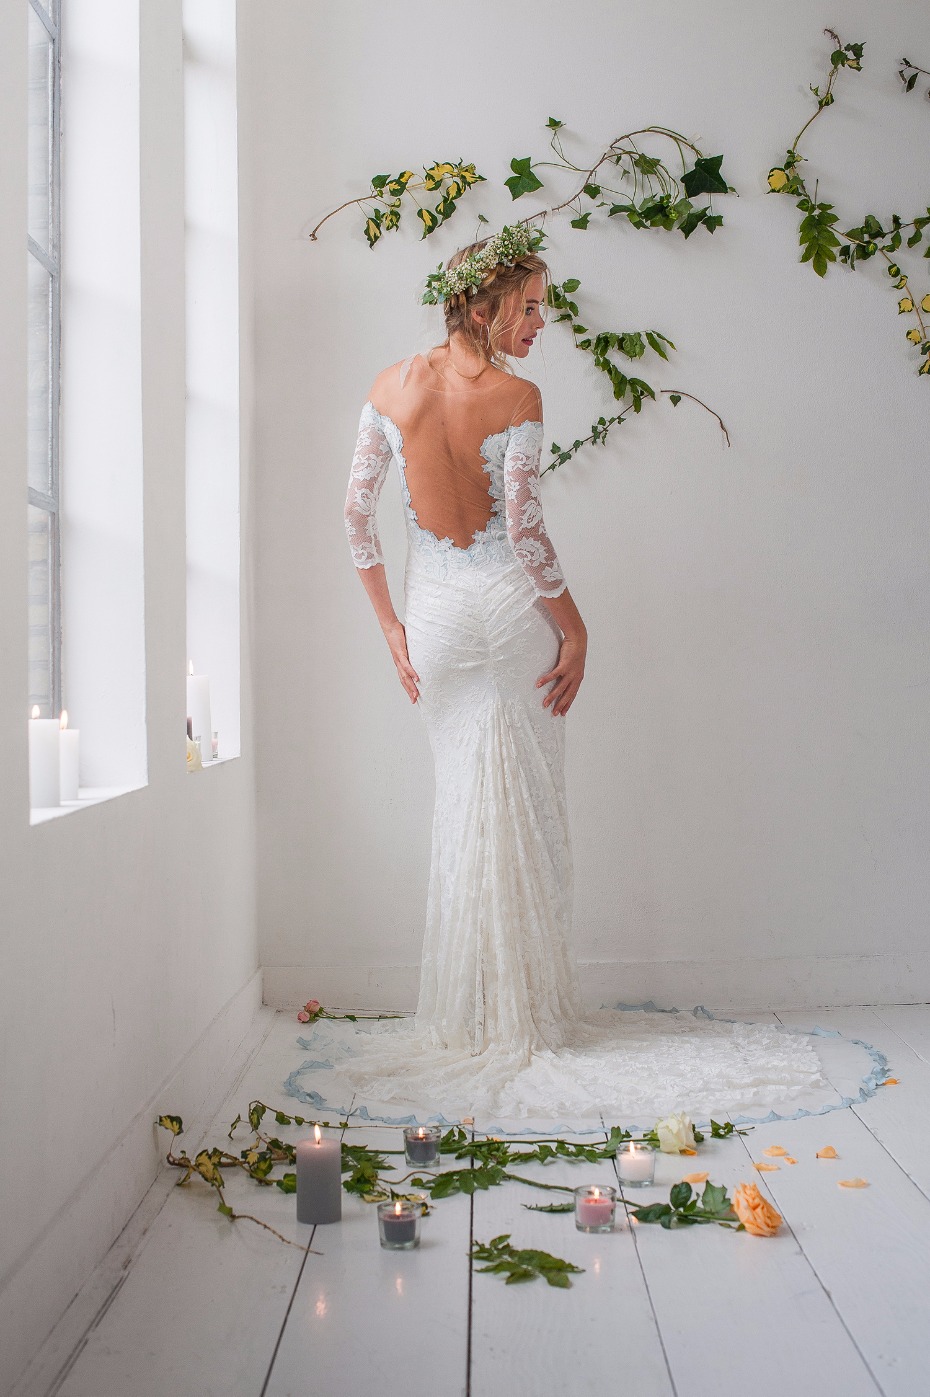 This lace gown will hug all your curves from Olvi's